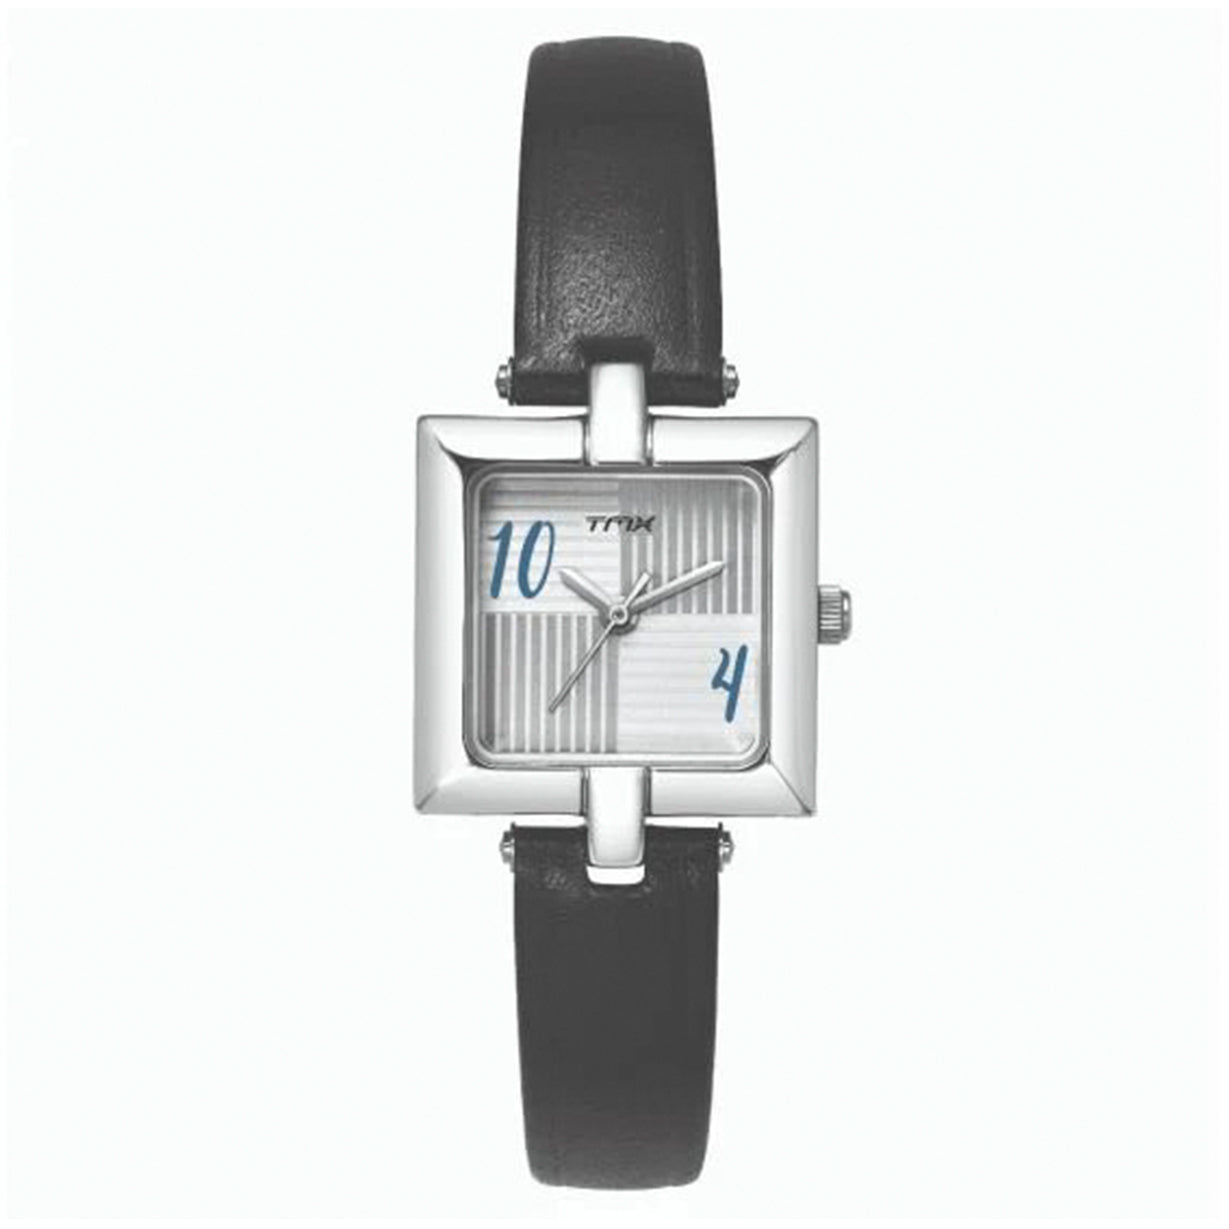 Geometric Patterned Dial Black Leather Strap